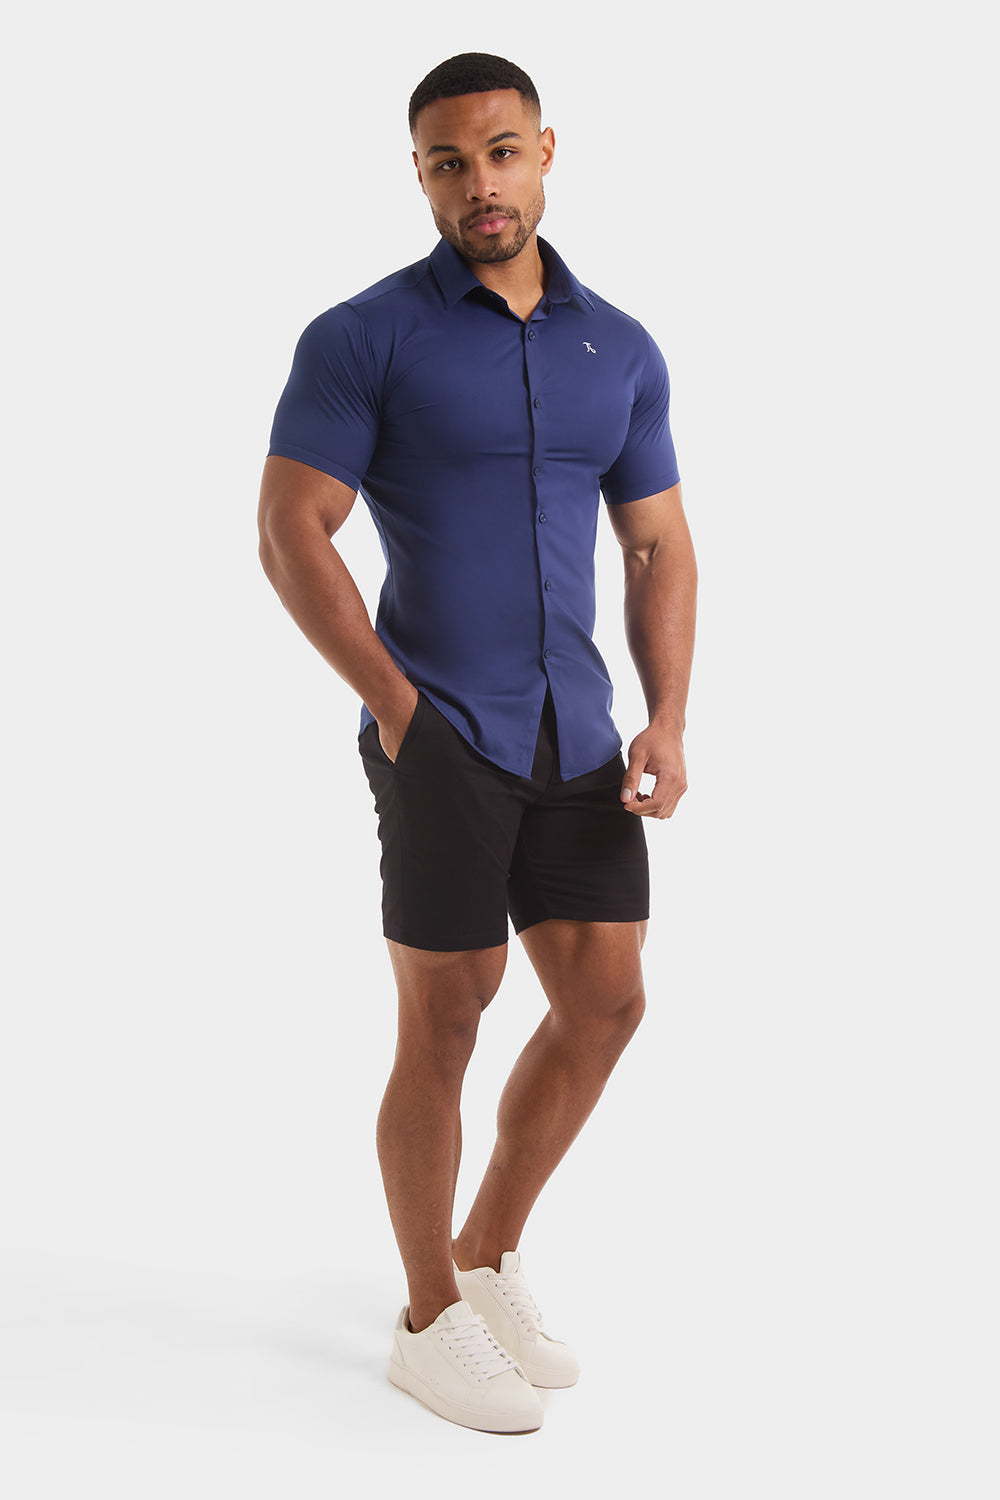 Muscle Fit Short Sleeve Bamboo Shirt in Navy - TAILORED ATHLETE - ROW